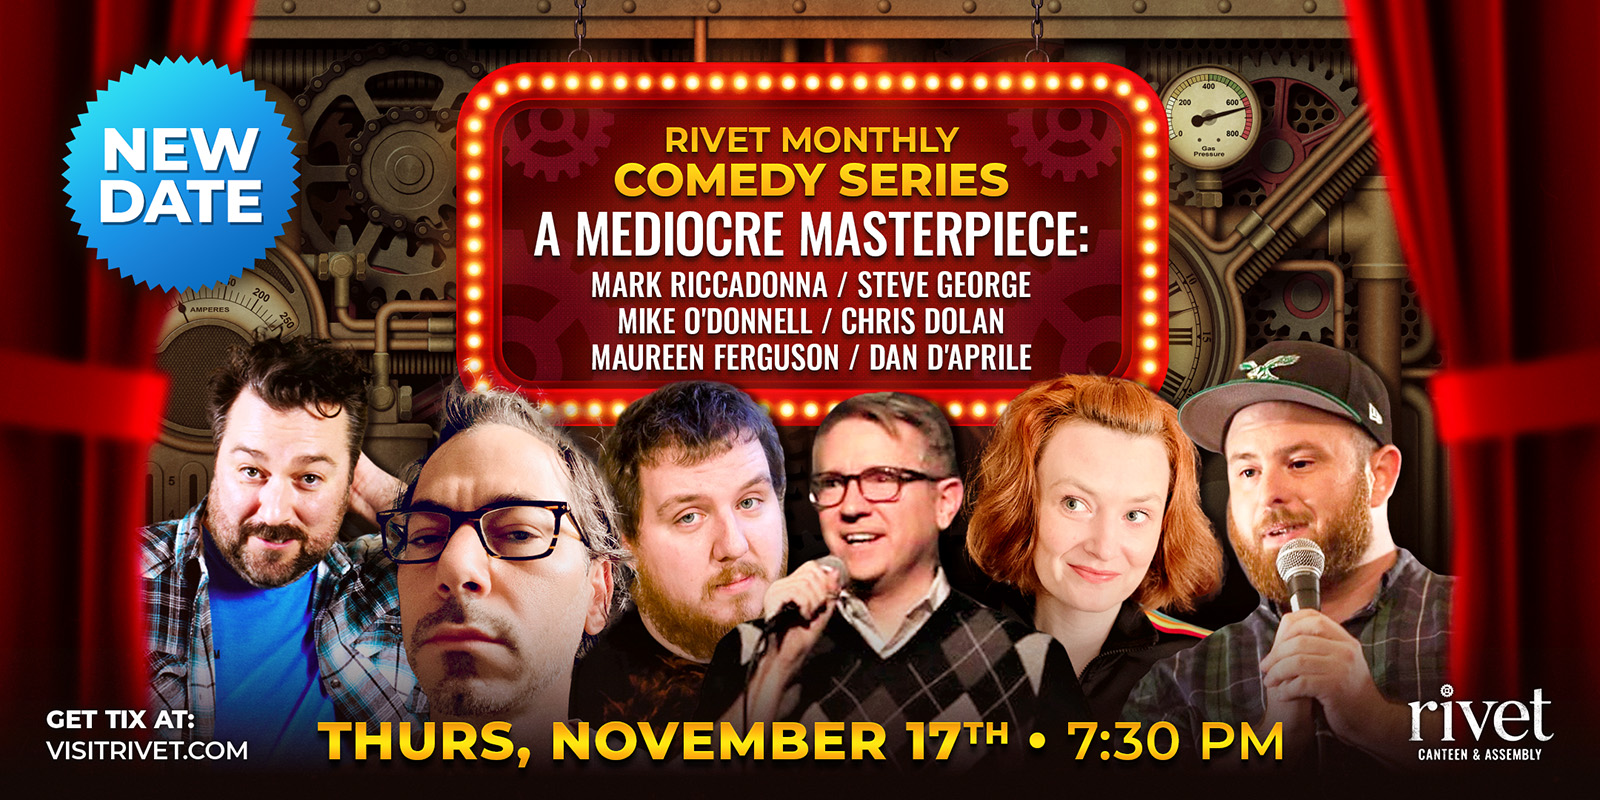 The Rivet Monthly Comedy Series continues with SIX amazing comics! This time Mark & Steve Presents 'A Mediocre Masterpiece' with Mark Riccadonna, Steve George, Mike O'Donnell, Chris Dolan, Maureen Ferguson, and Dan D'Aprile. Thursday, November 17th at Rivet: Canteen & Assembly in Pottstown, PA.